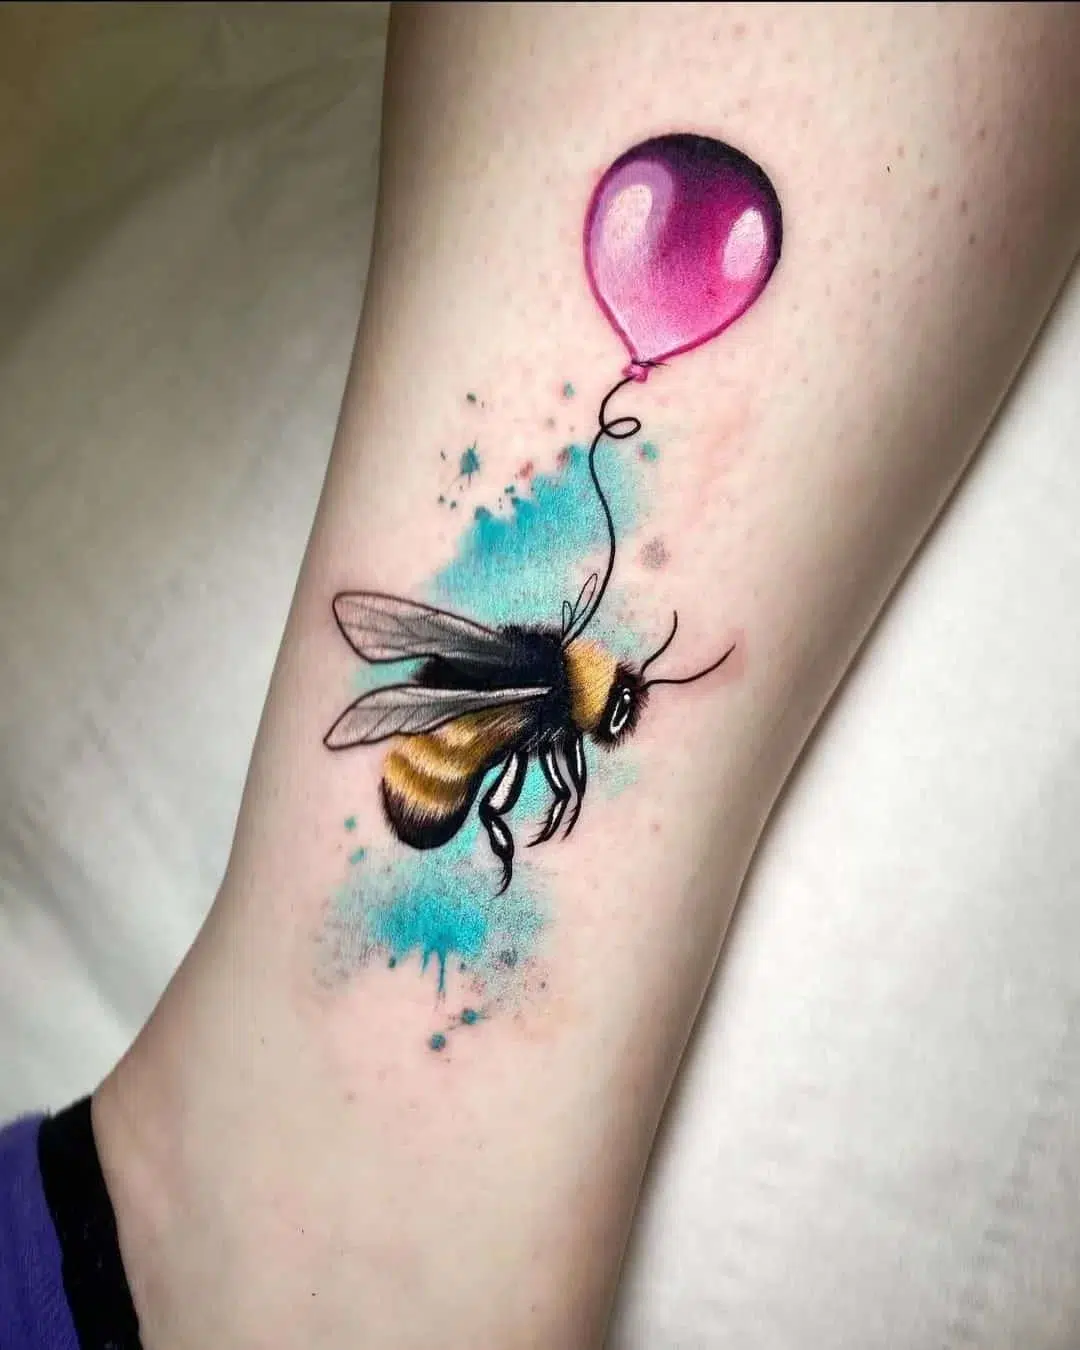 Watercolor girl with balloon tattoo by Mentjuh on DeviantArt